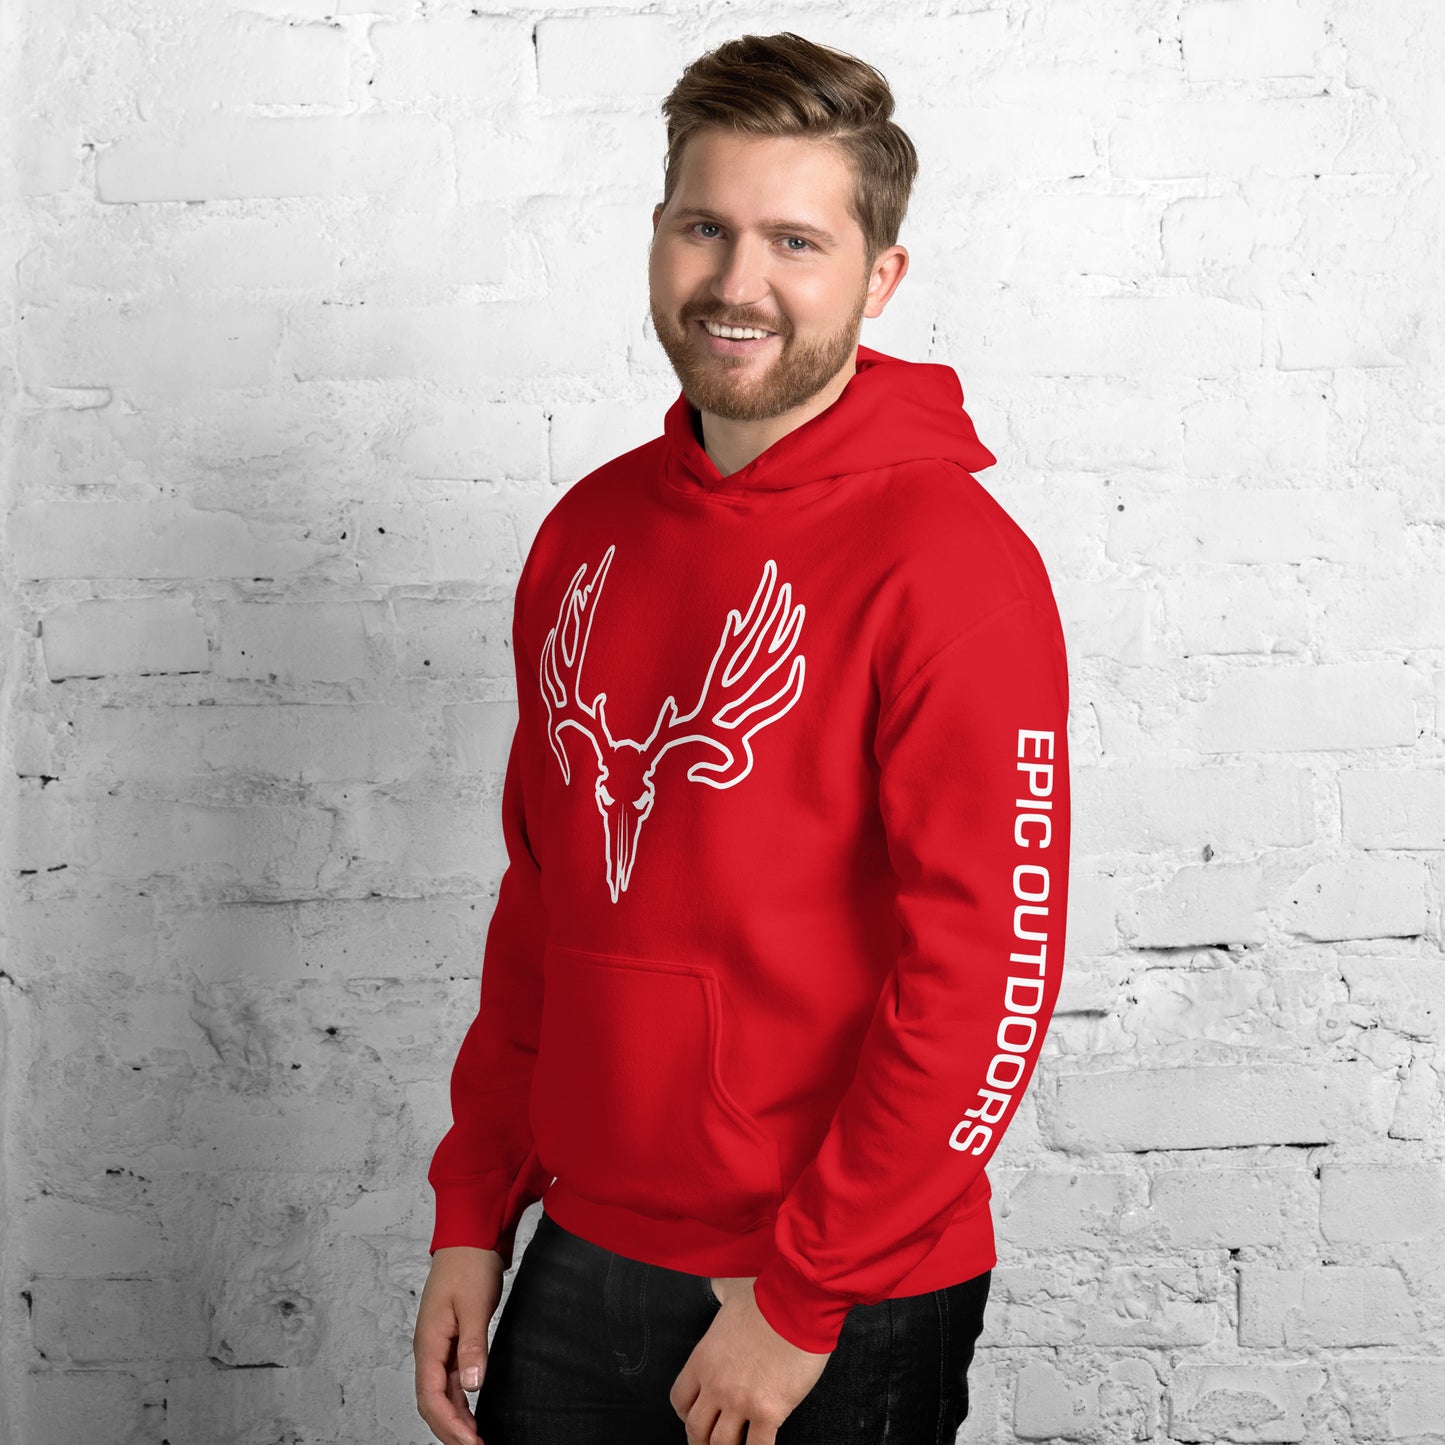 White Epic Logo Outline Unisex Hoodie - Cotton-Poly Blend 18500